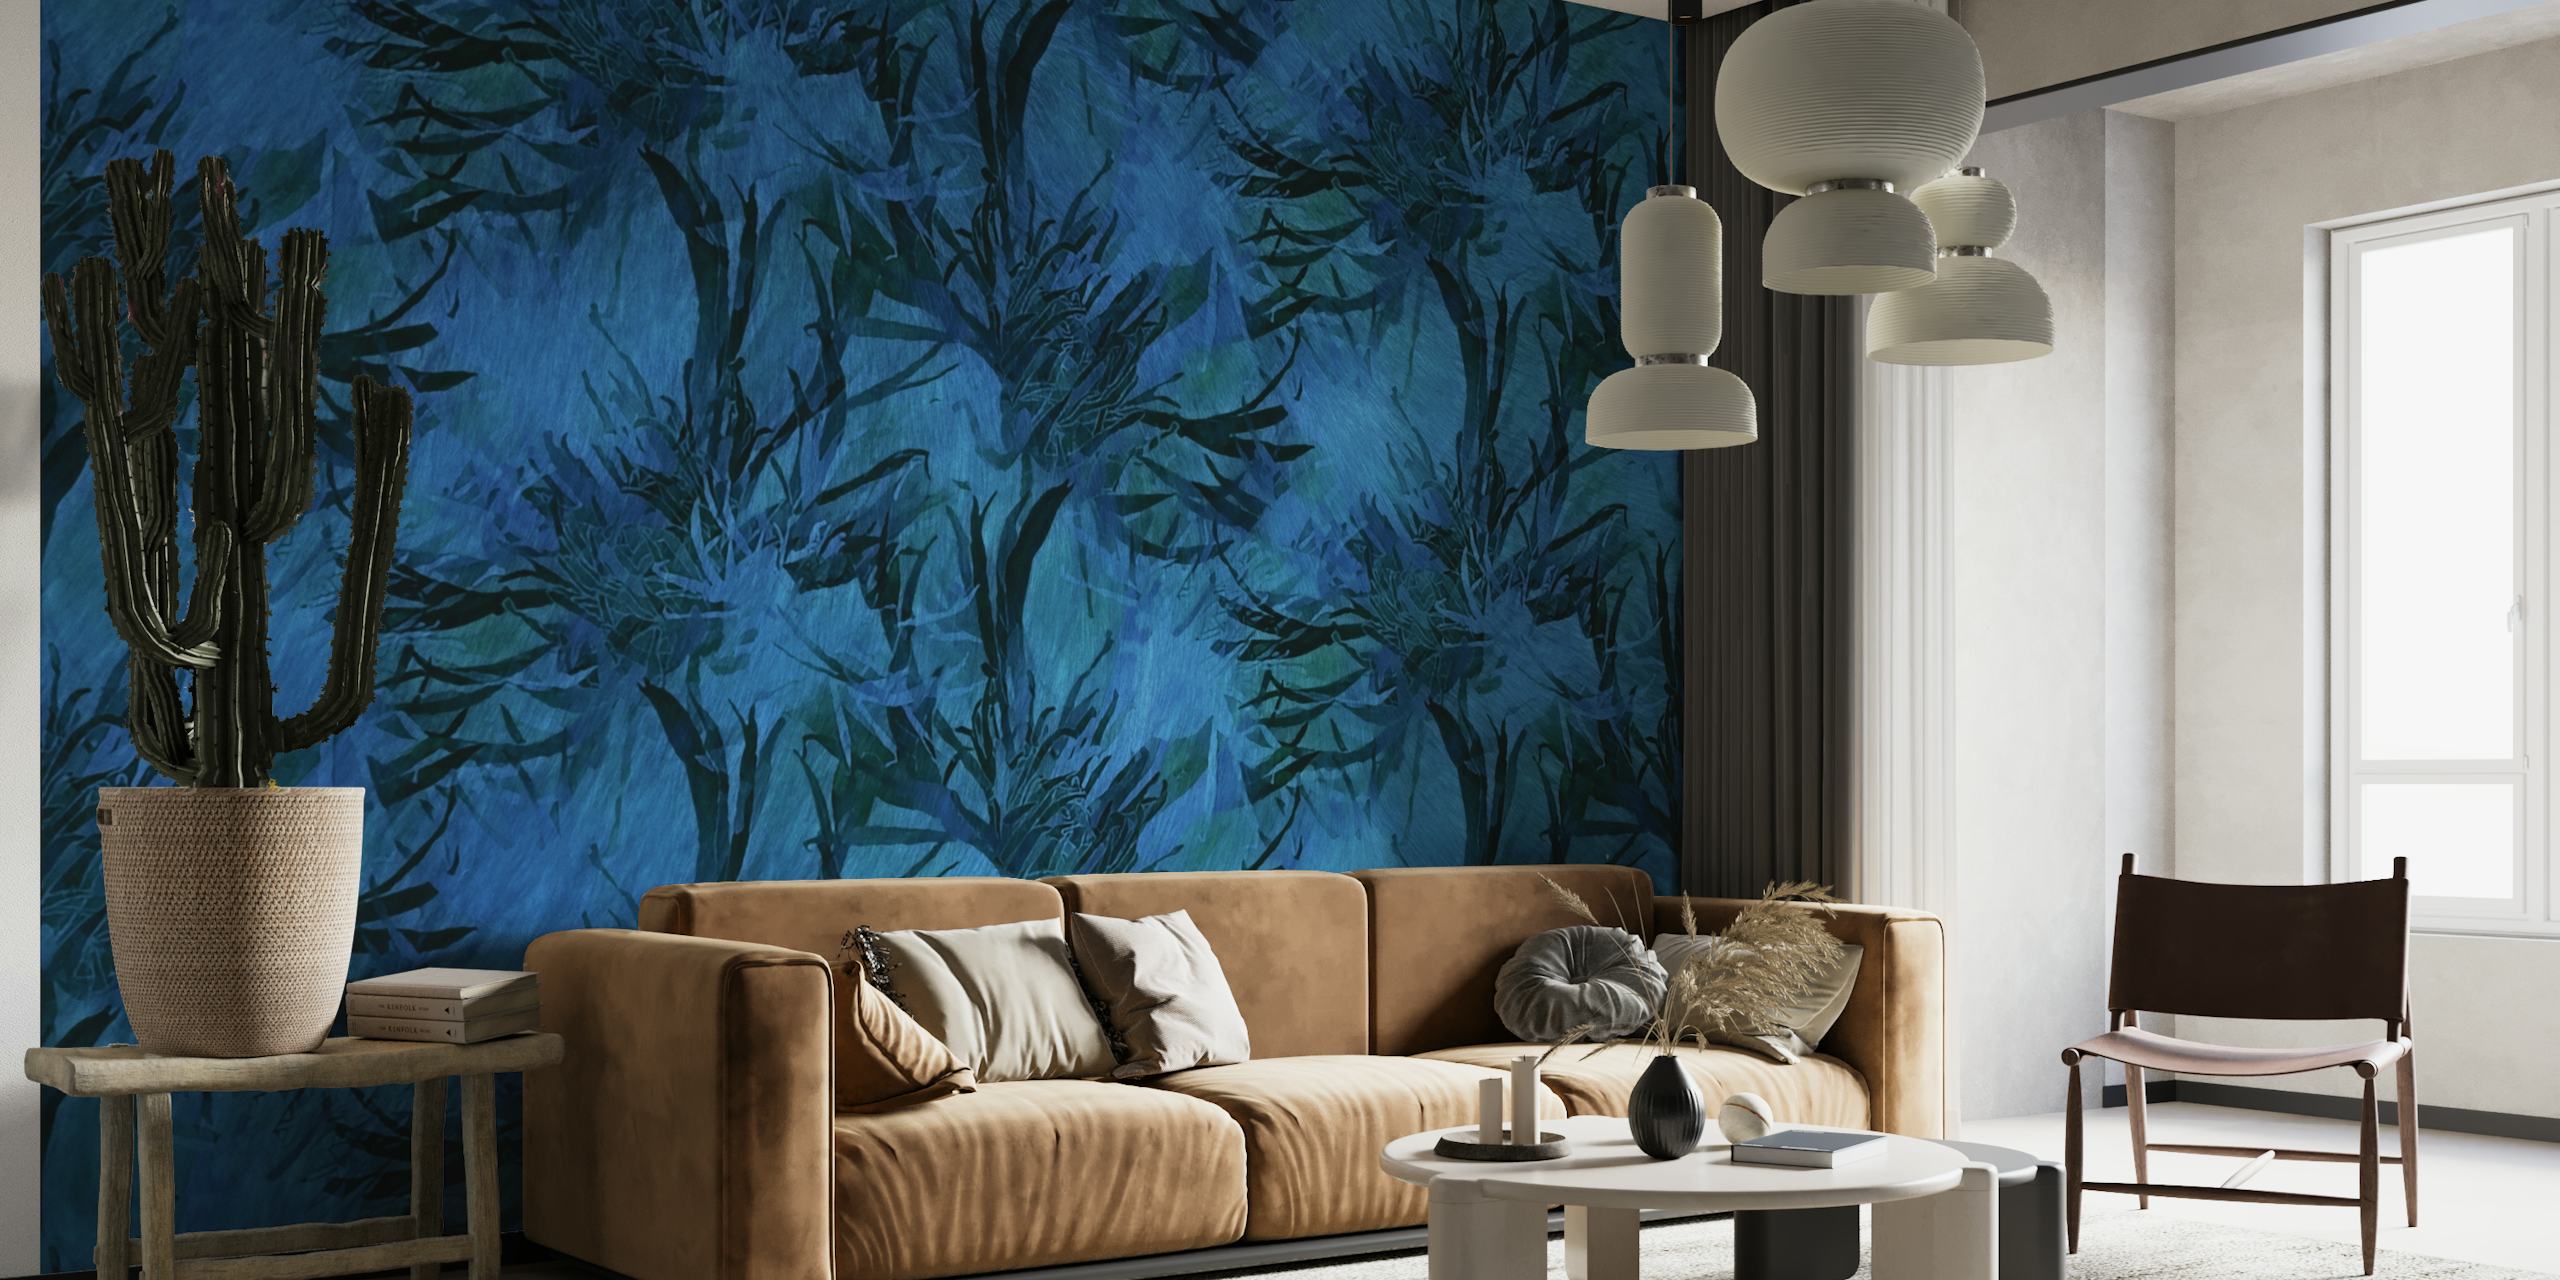 Teal floral silhouettes on deep blue background wall mural